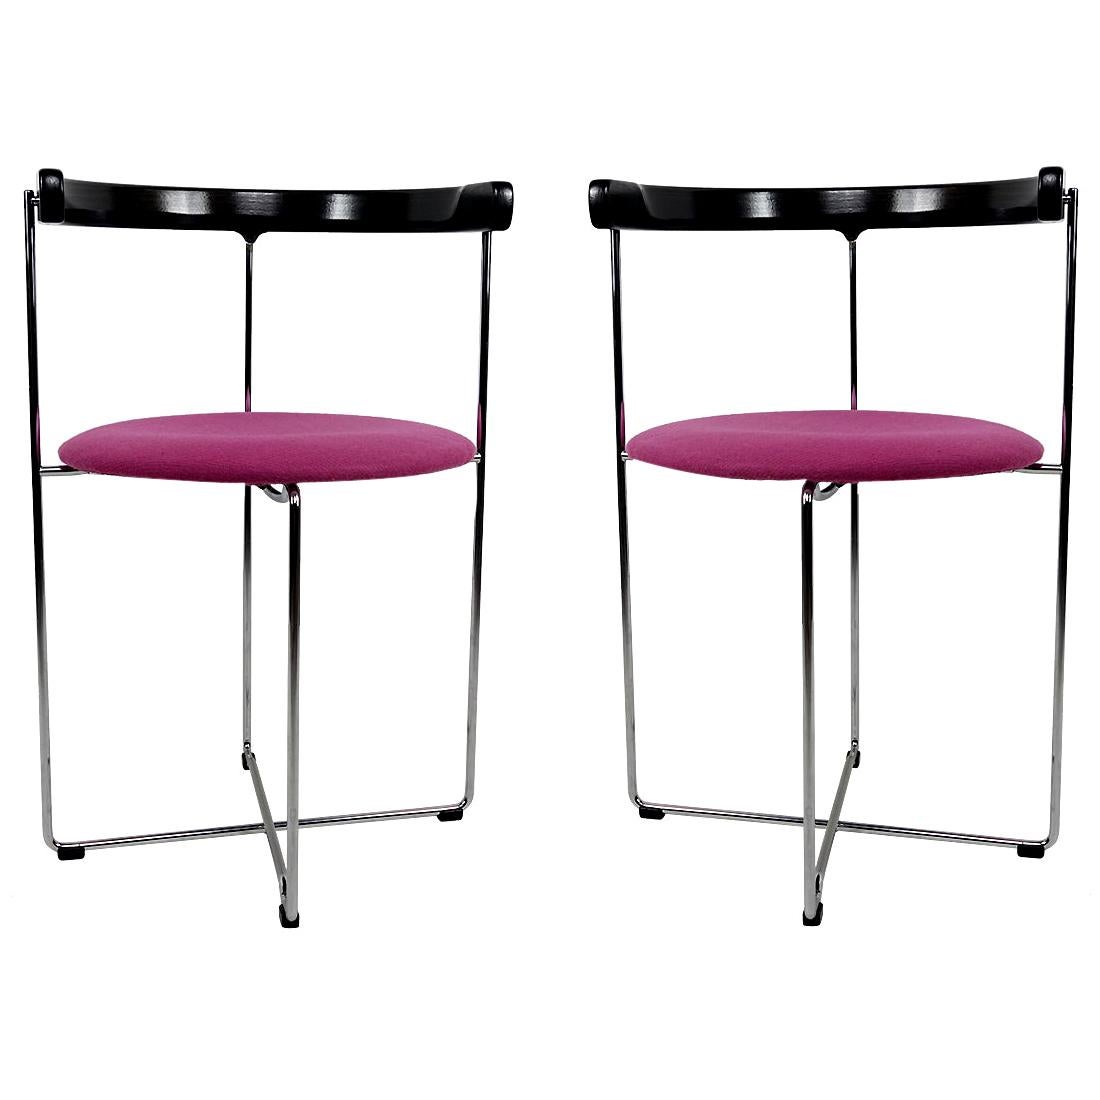 Post-Modern Pair of Sóley Folding Chairs by Valdimar Hardarson for Kusch+Co.